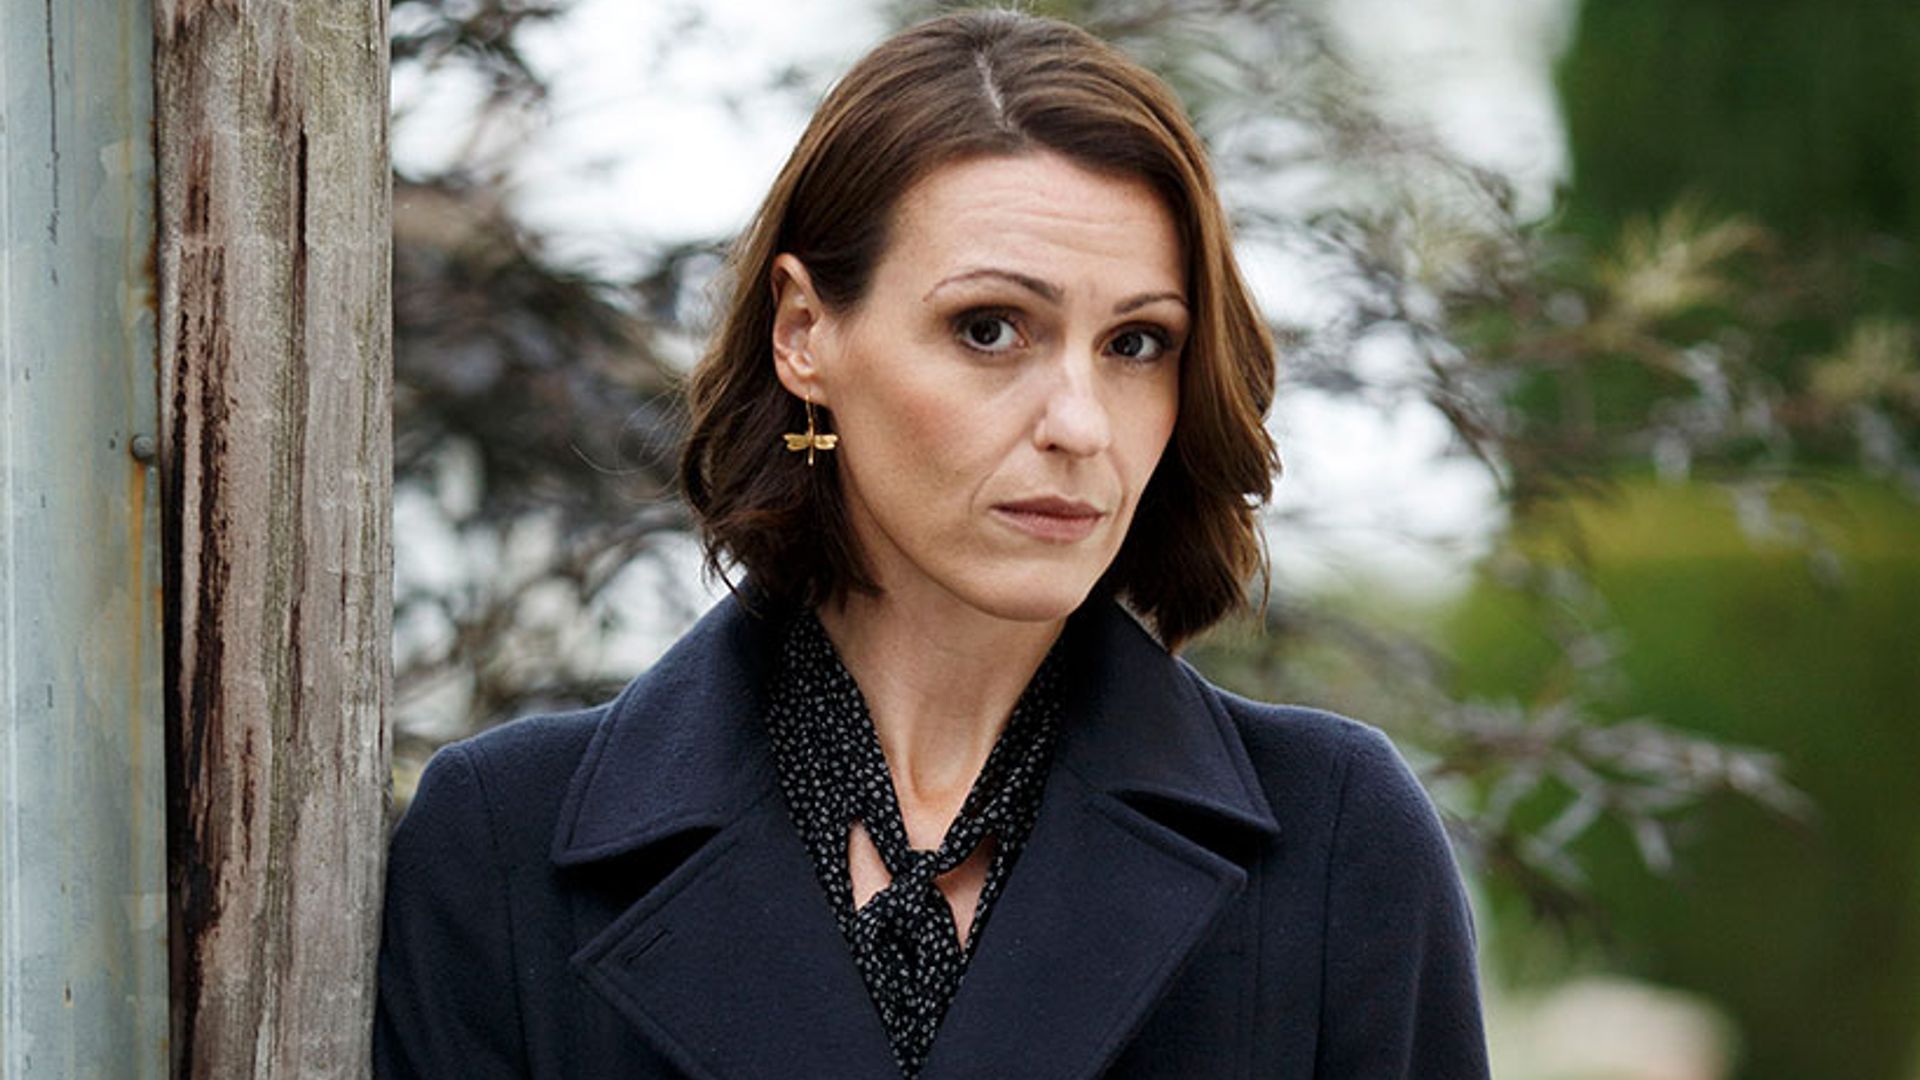 There was going to be an alternative Doctor Foster ending - find out more here